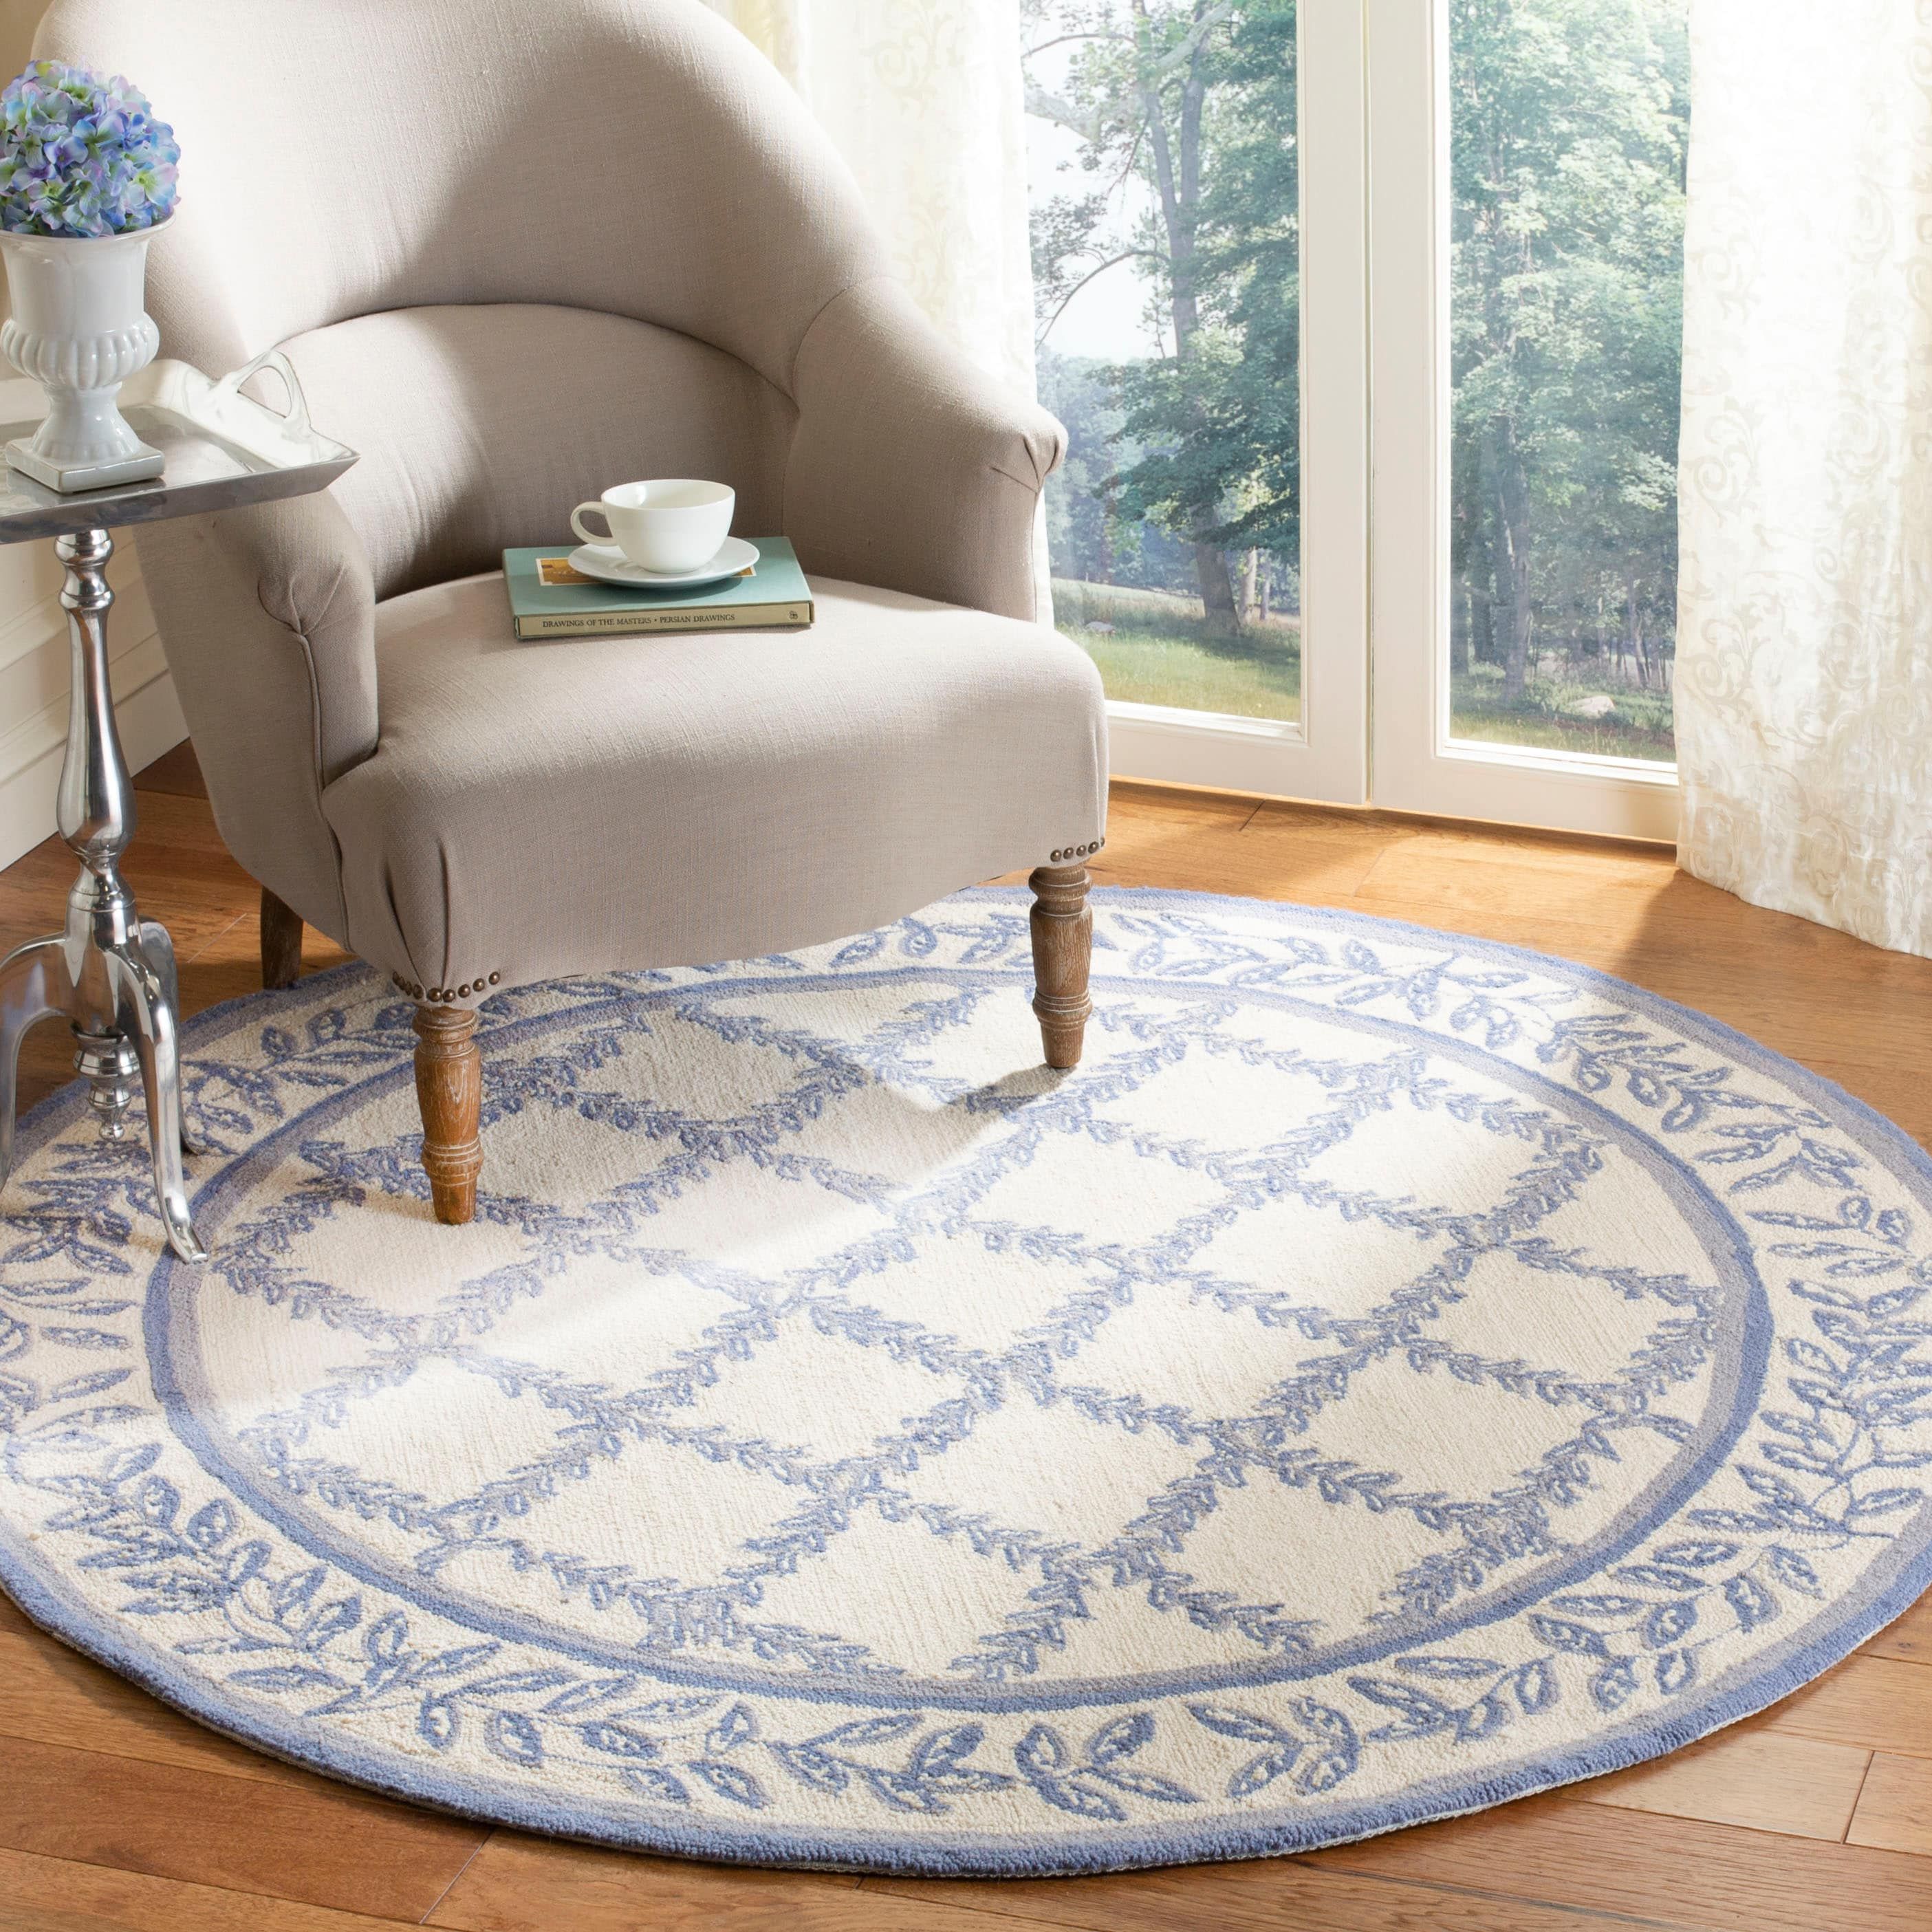 Safavieh Chelsea Lattice 8 X 10 Wool Ivory/Light Blue Oval Indoor  Floral/Botanical Tropical Area Rug In The Rugs Department At Lowes Inside Lattice Oval Rugs (View 6 of 15)